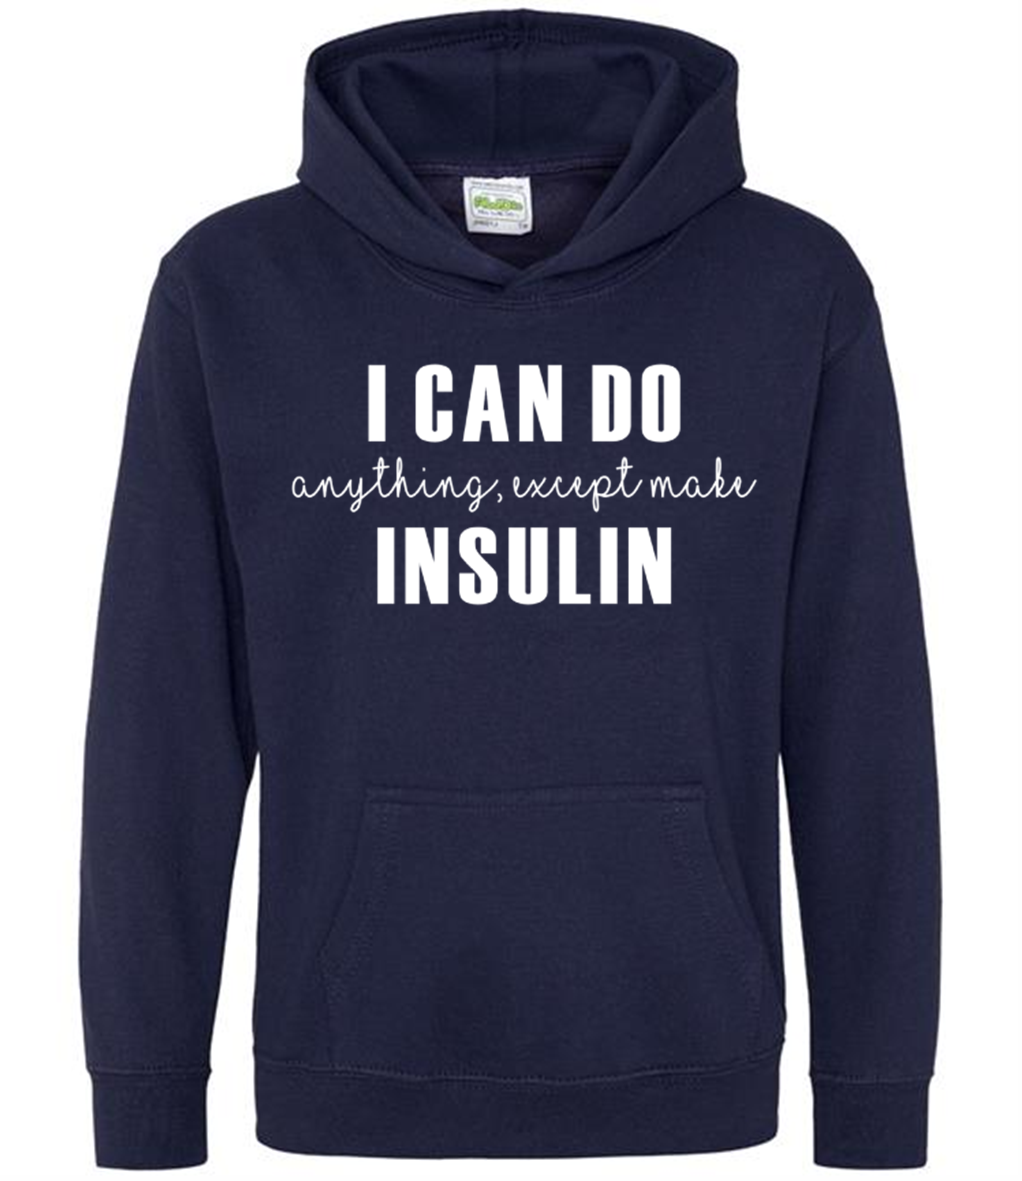 I Can Do Anything, Except Make Insulin Kids Hoodie